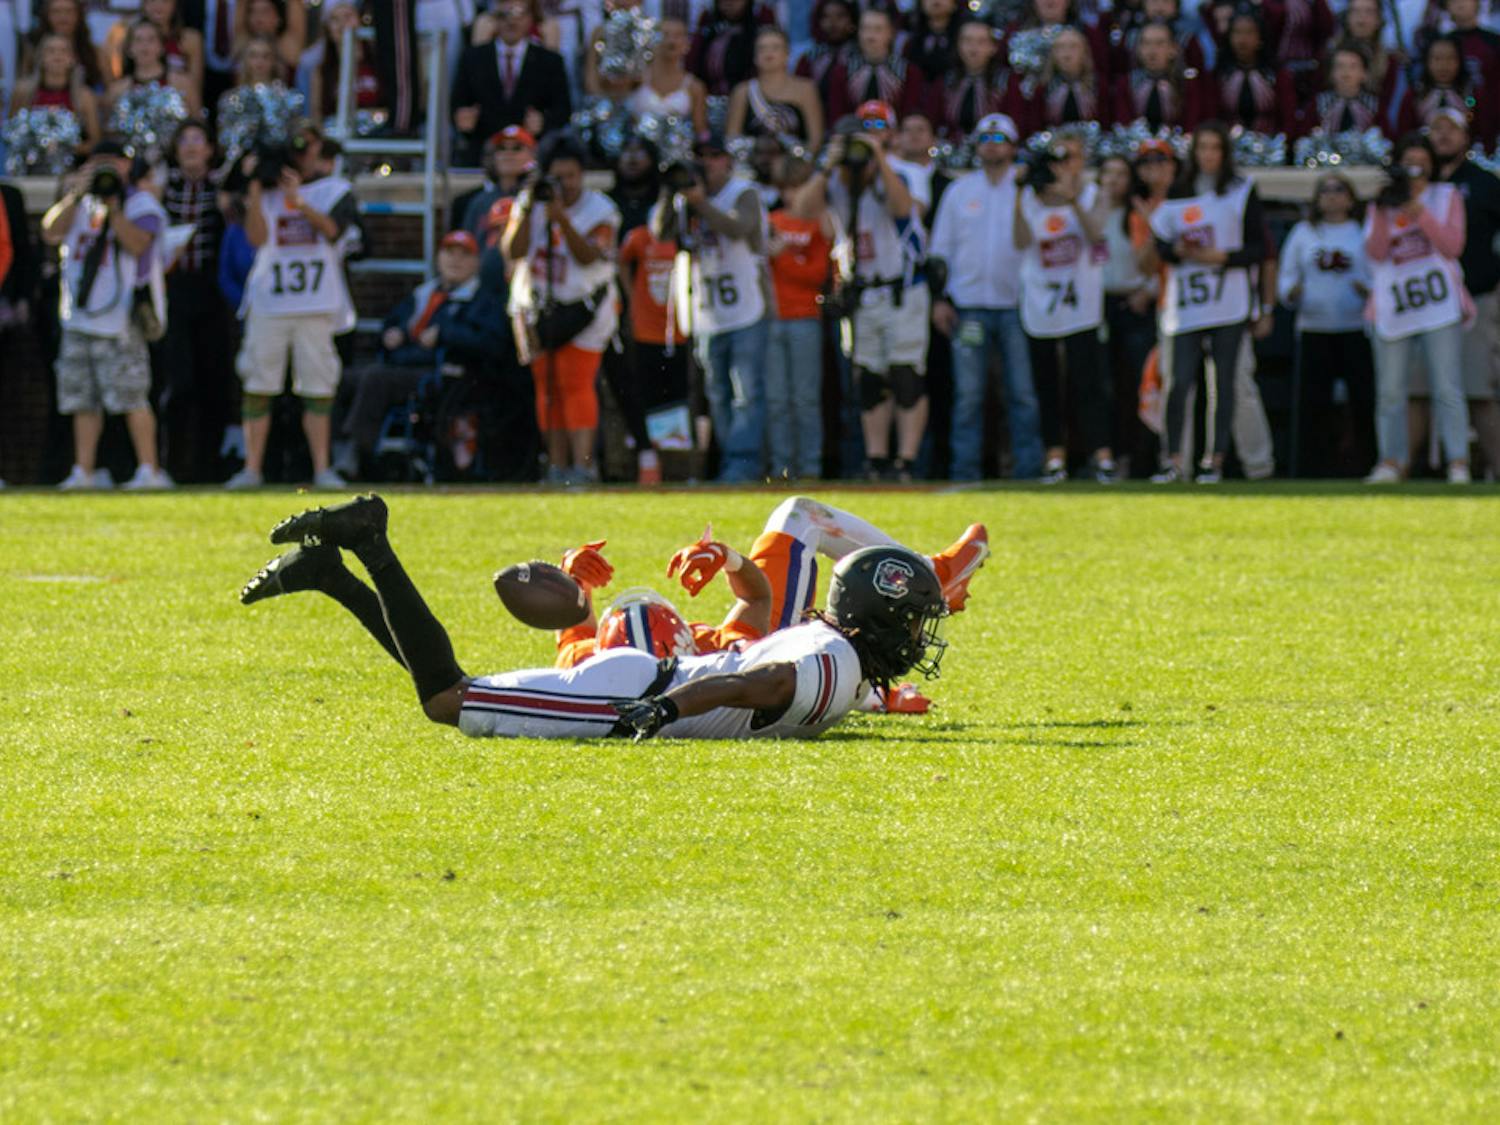 Redshirt junior defensive back Cam Smith sliding across the turf with a Clemson player after an incomplete pass on Nov. 26, 2022 at Memorial Stadium. Smith made one tackle and one assisted tackle against Clemson.